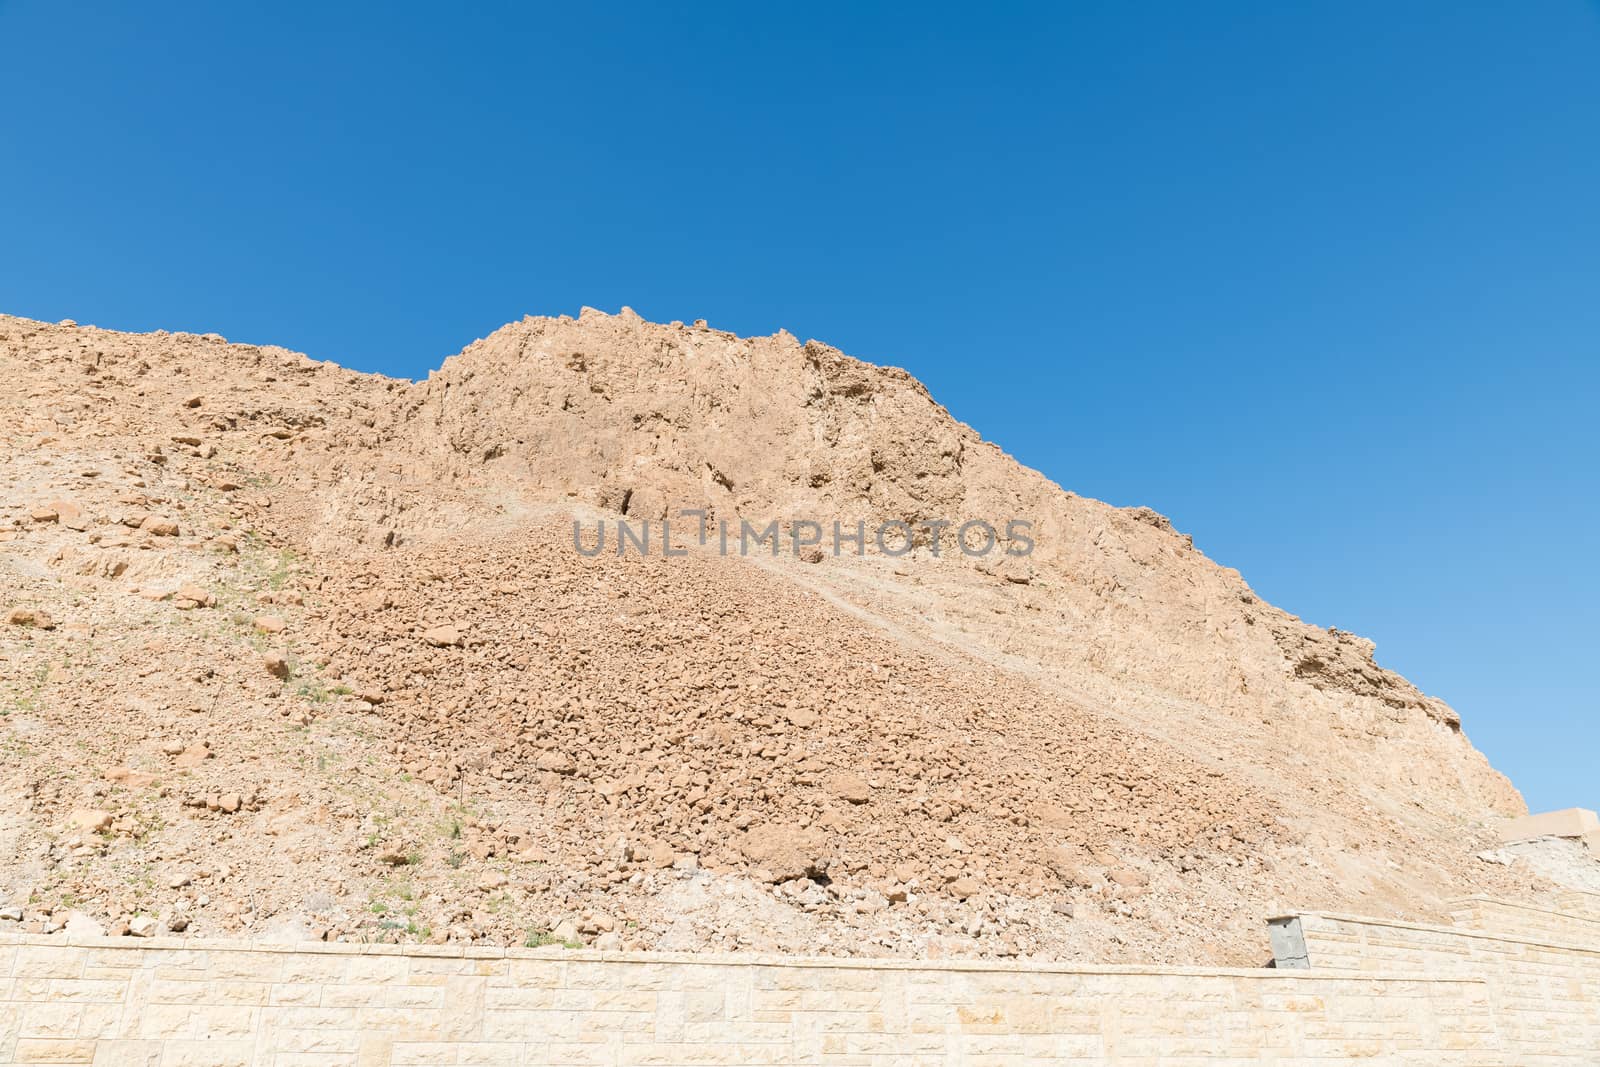 rock and blue sky in israel near masada by compuinfoto